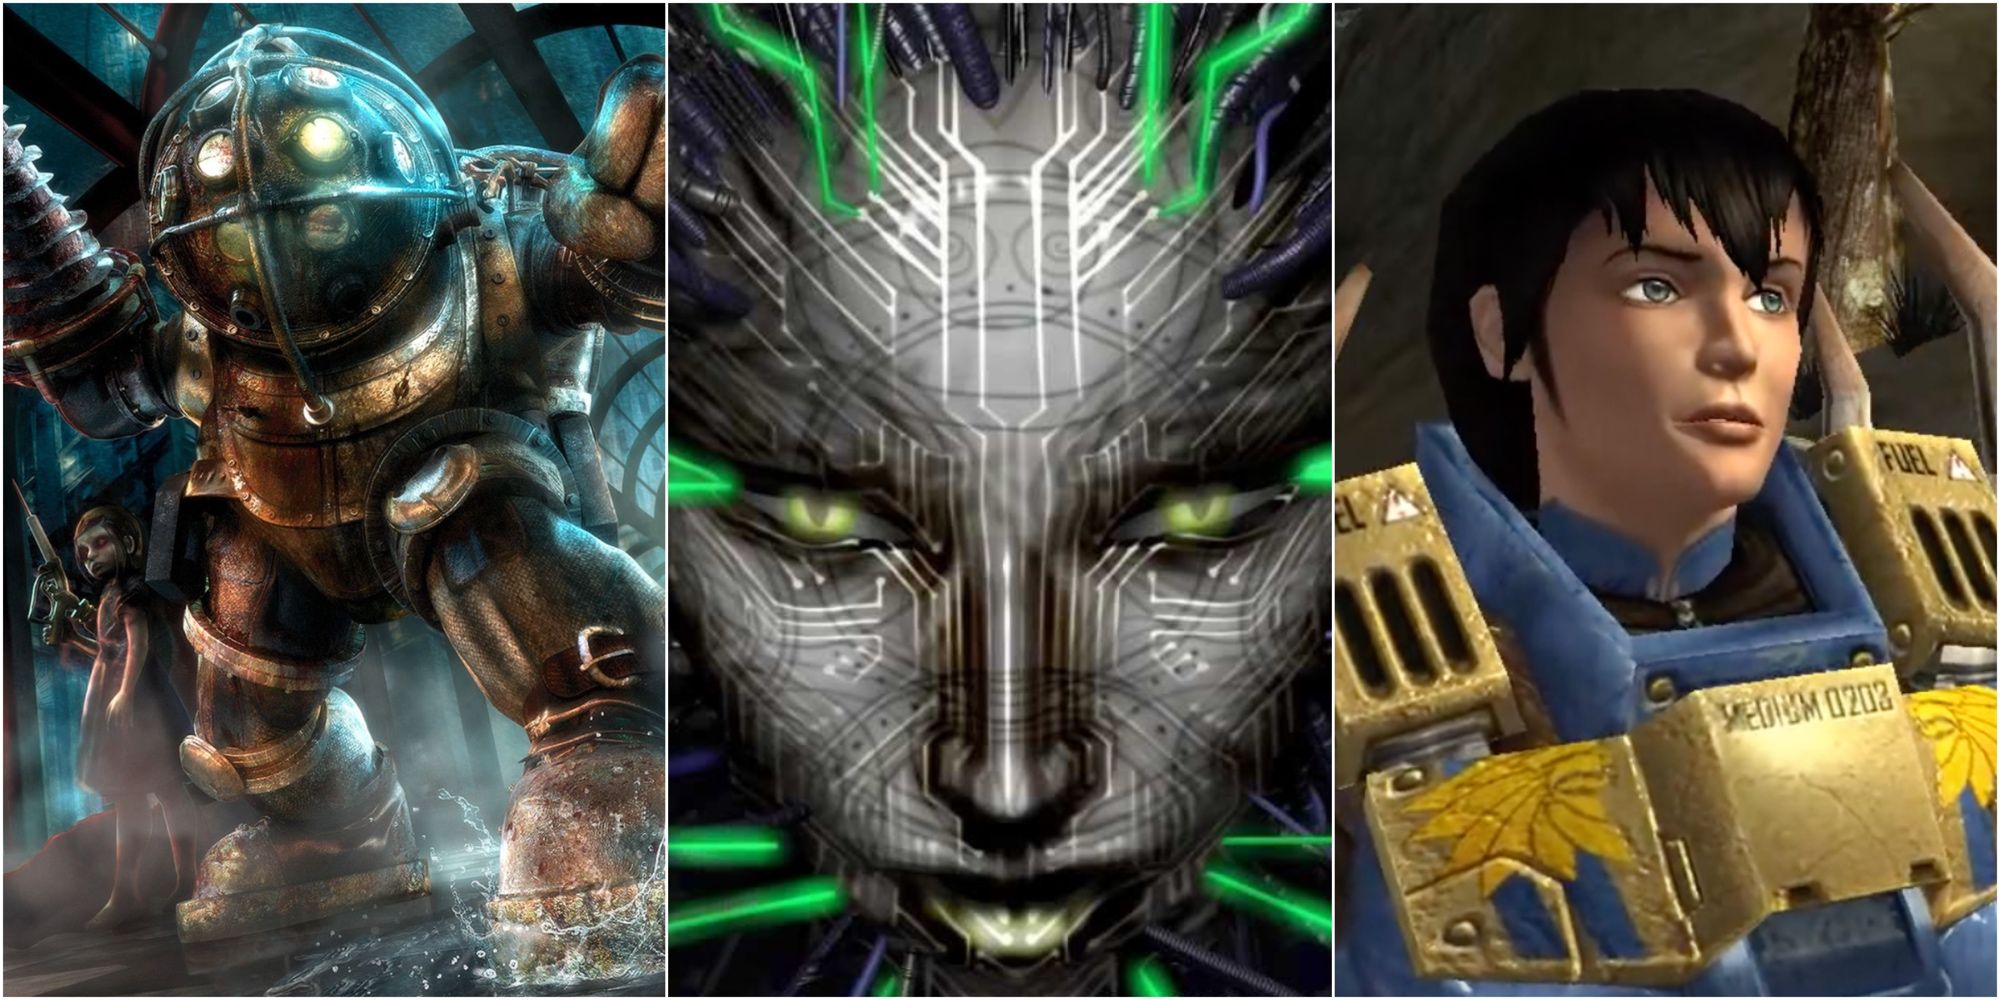 Bioshock, Systeem Shock 2, and Tribes: Vengeance 